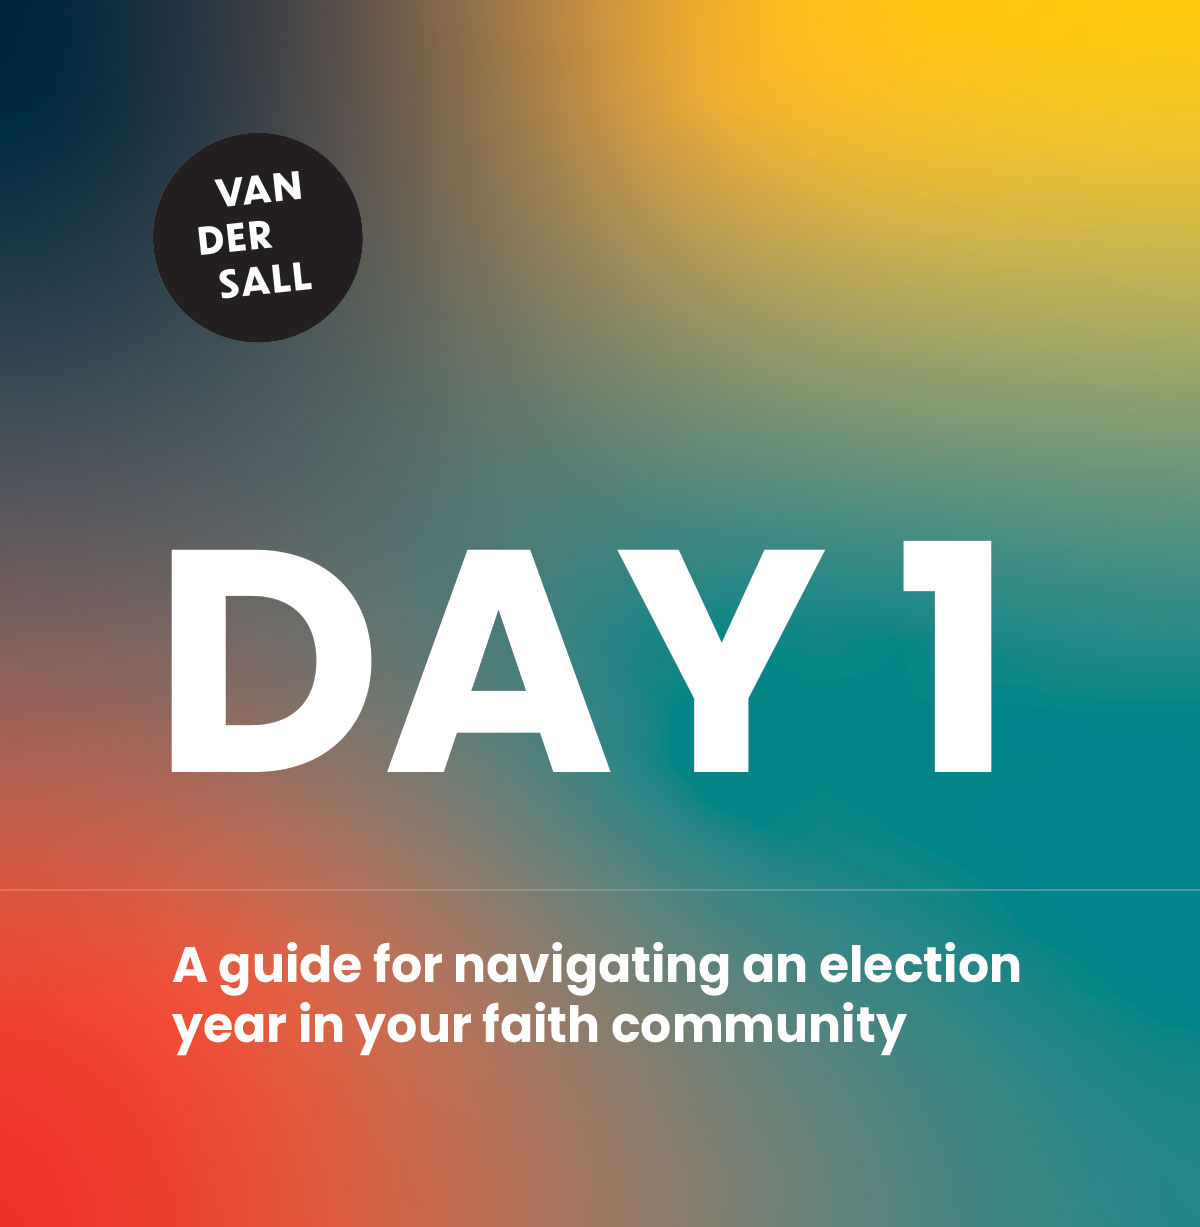 Vandersall Collective releases new resource for churches navigating the election